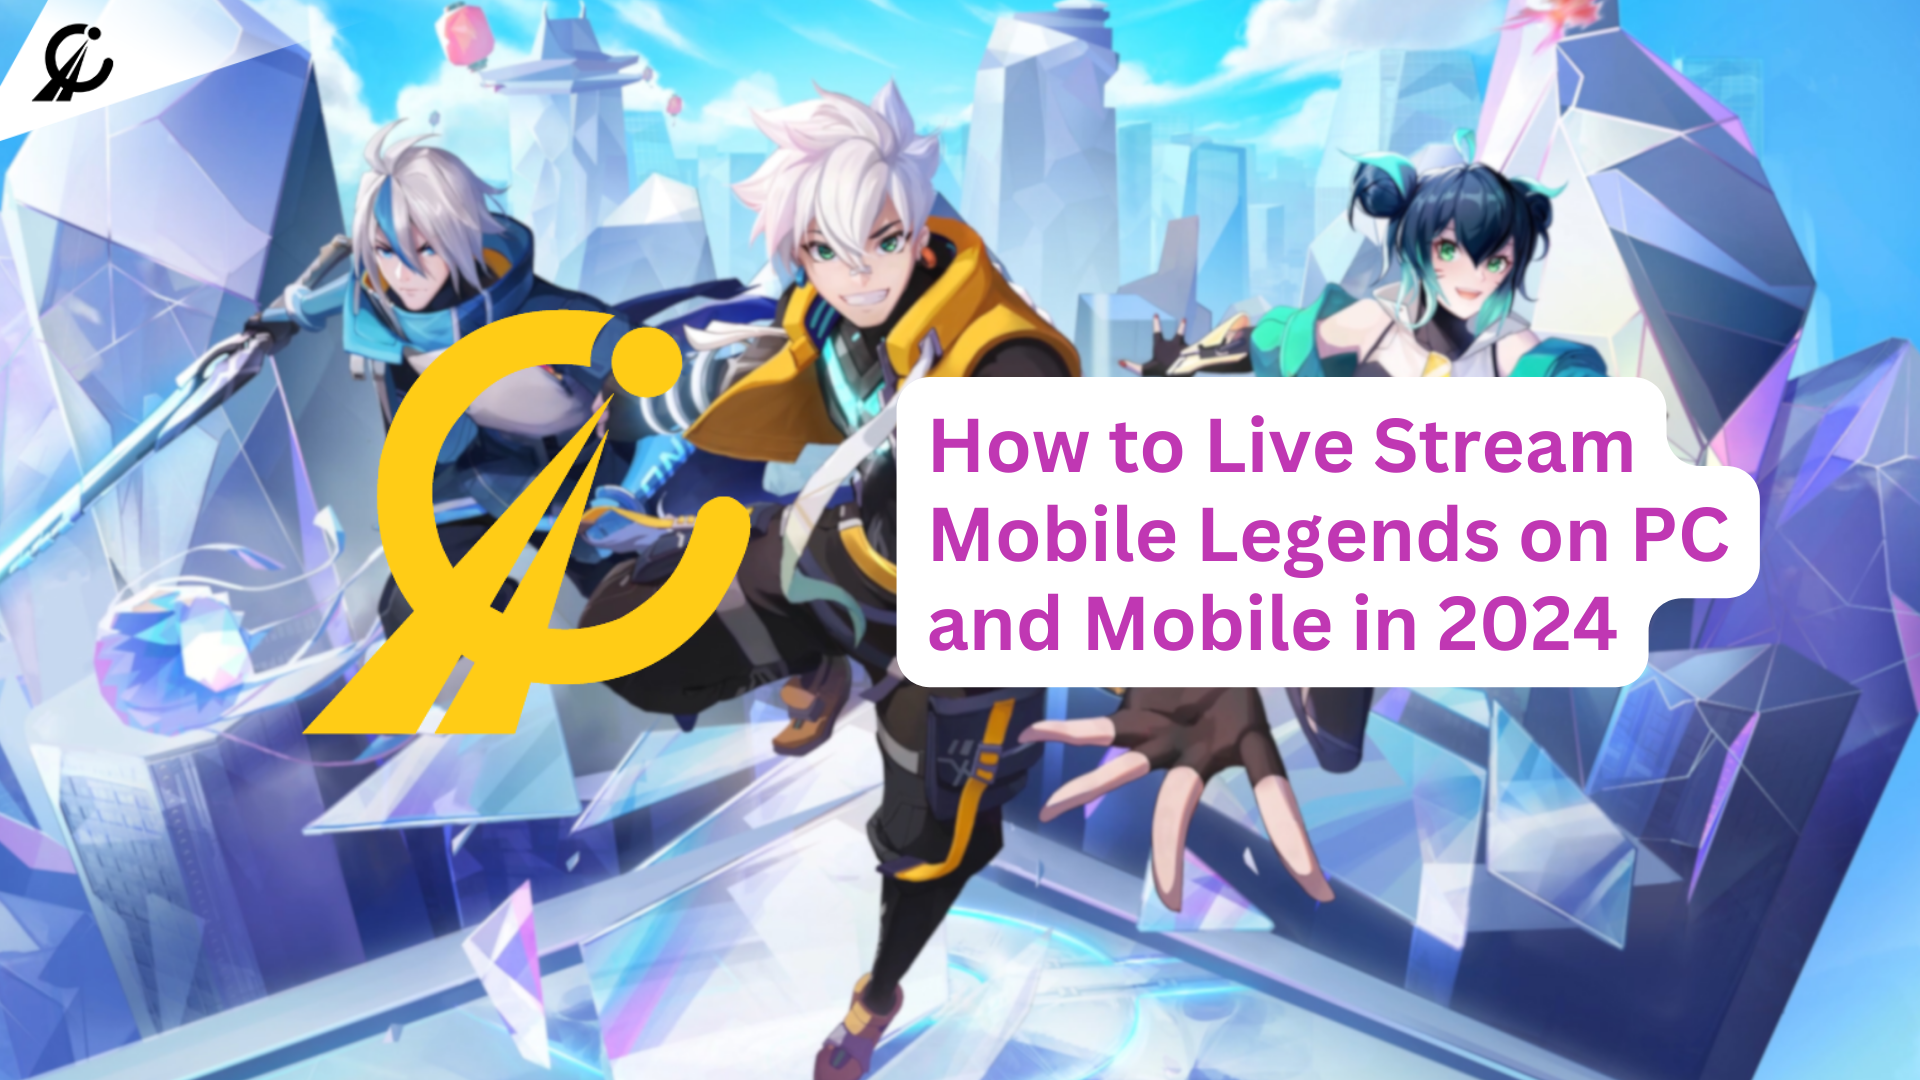 How to Live Stream Mobile Legends on PC and Mobile in 2024